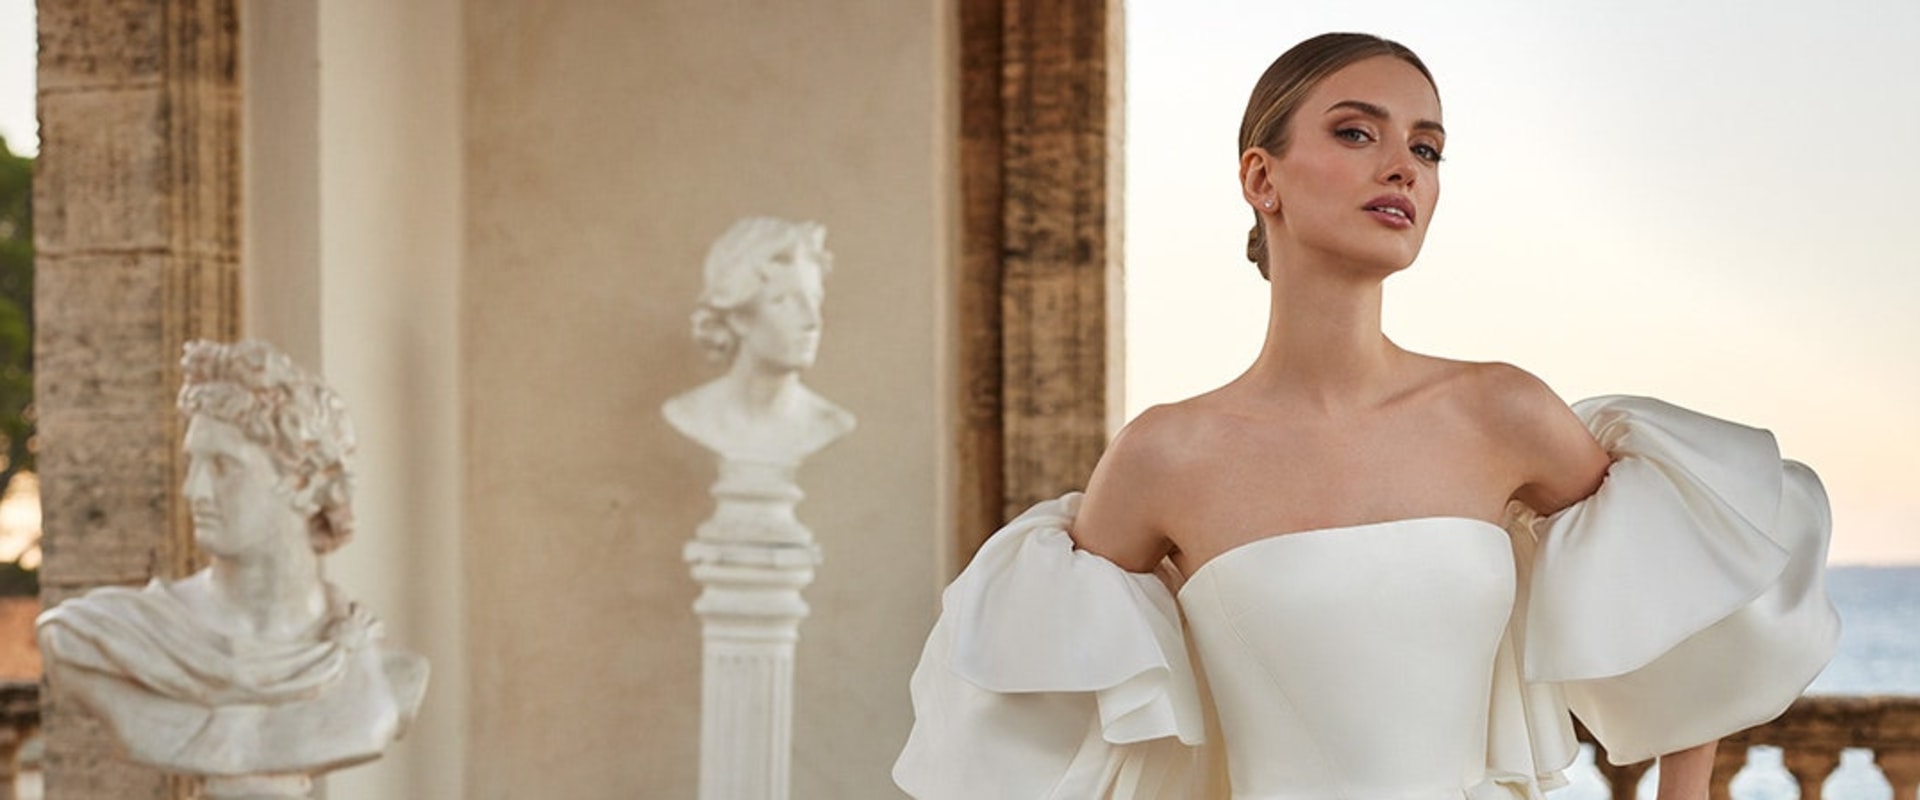 Marchesa: The Ultimate Guide to Bridal Fashion